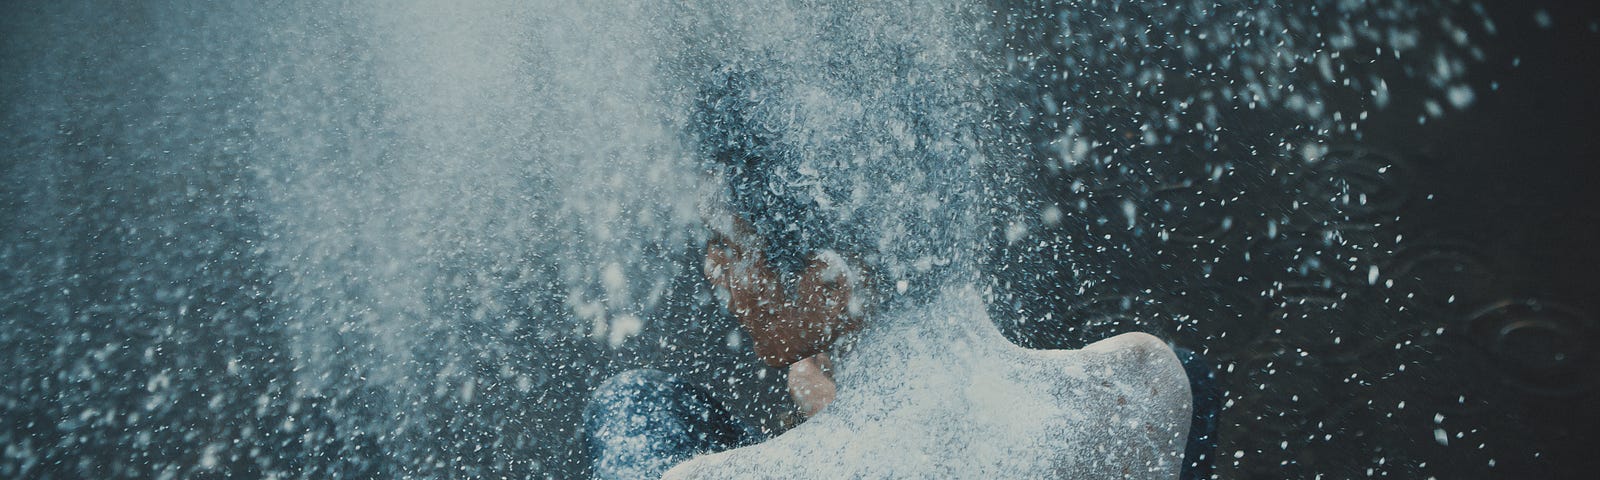 image of a person’s naked back and side of face. background dark blue with water droplets and a light shining on the person.